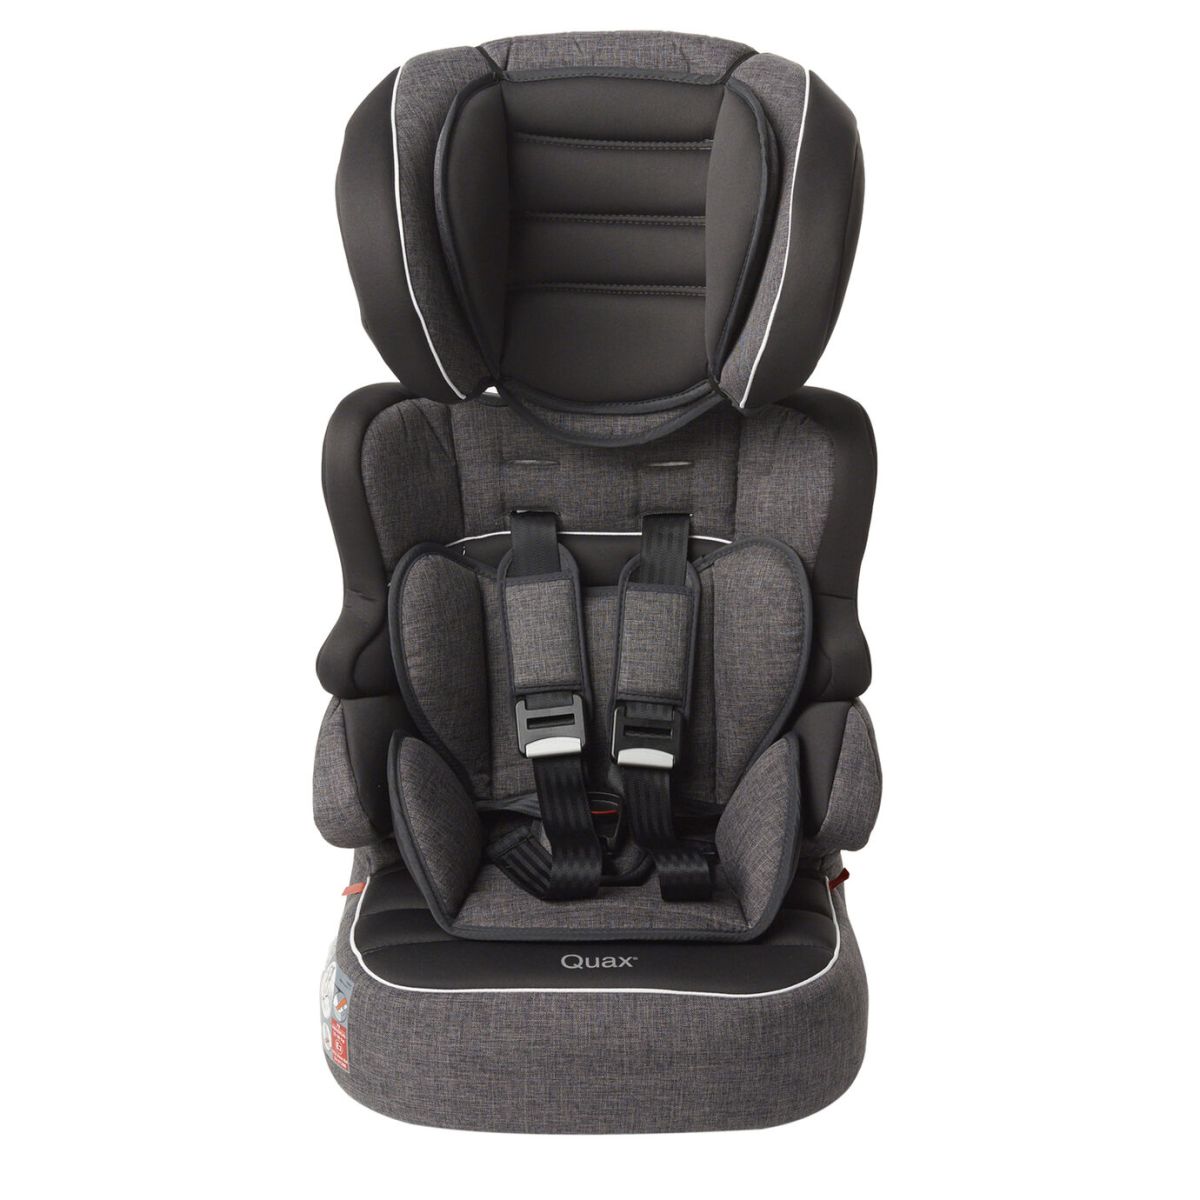 QUAX Beline car seat linen grey - Group 1-2-3 (9 to 36 kg) - Car seats -  Orchestra